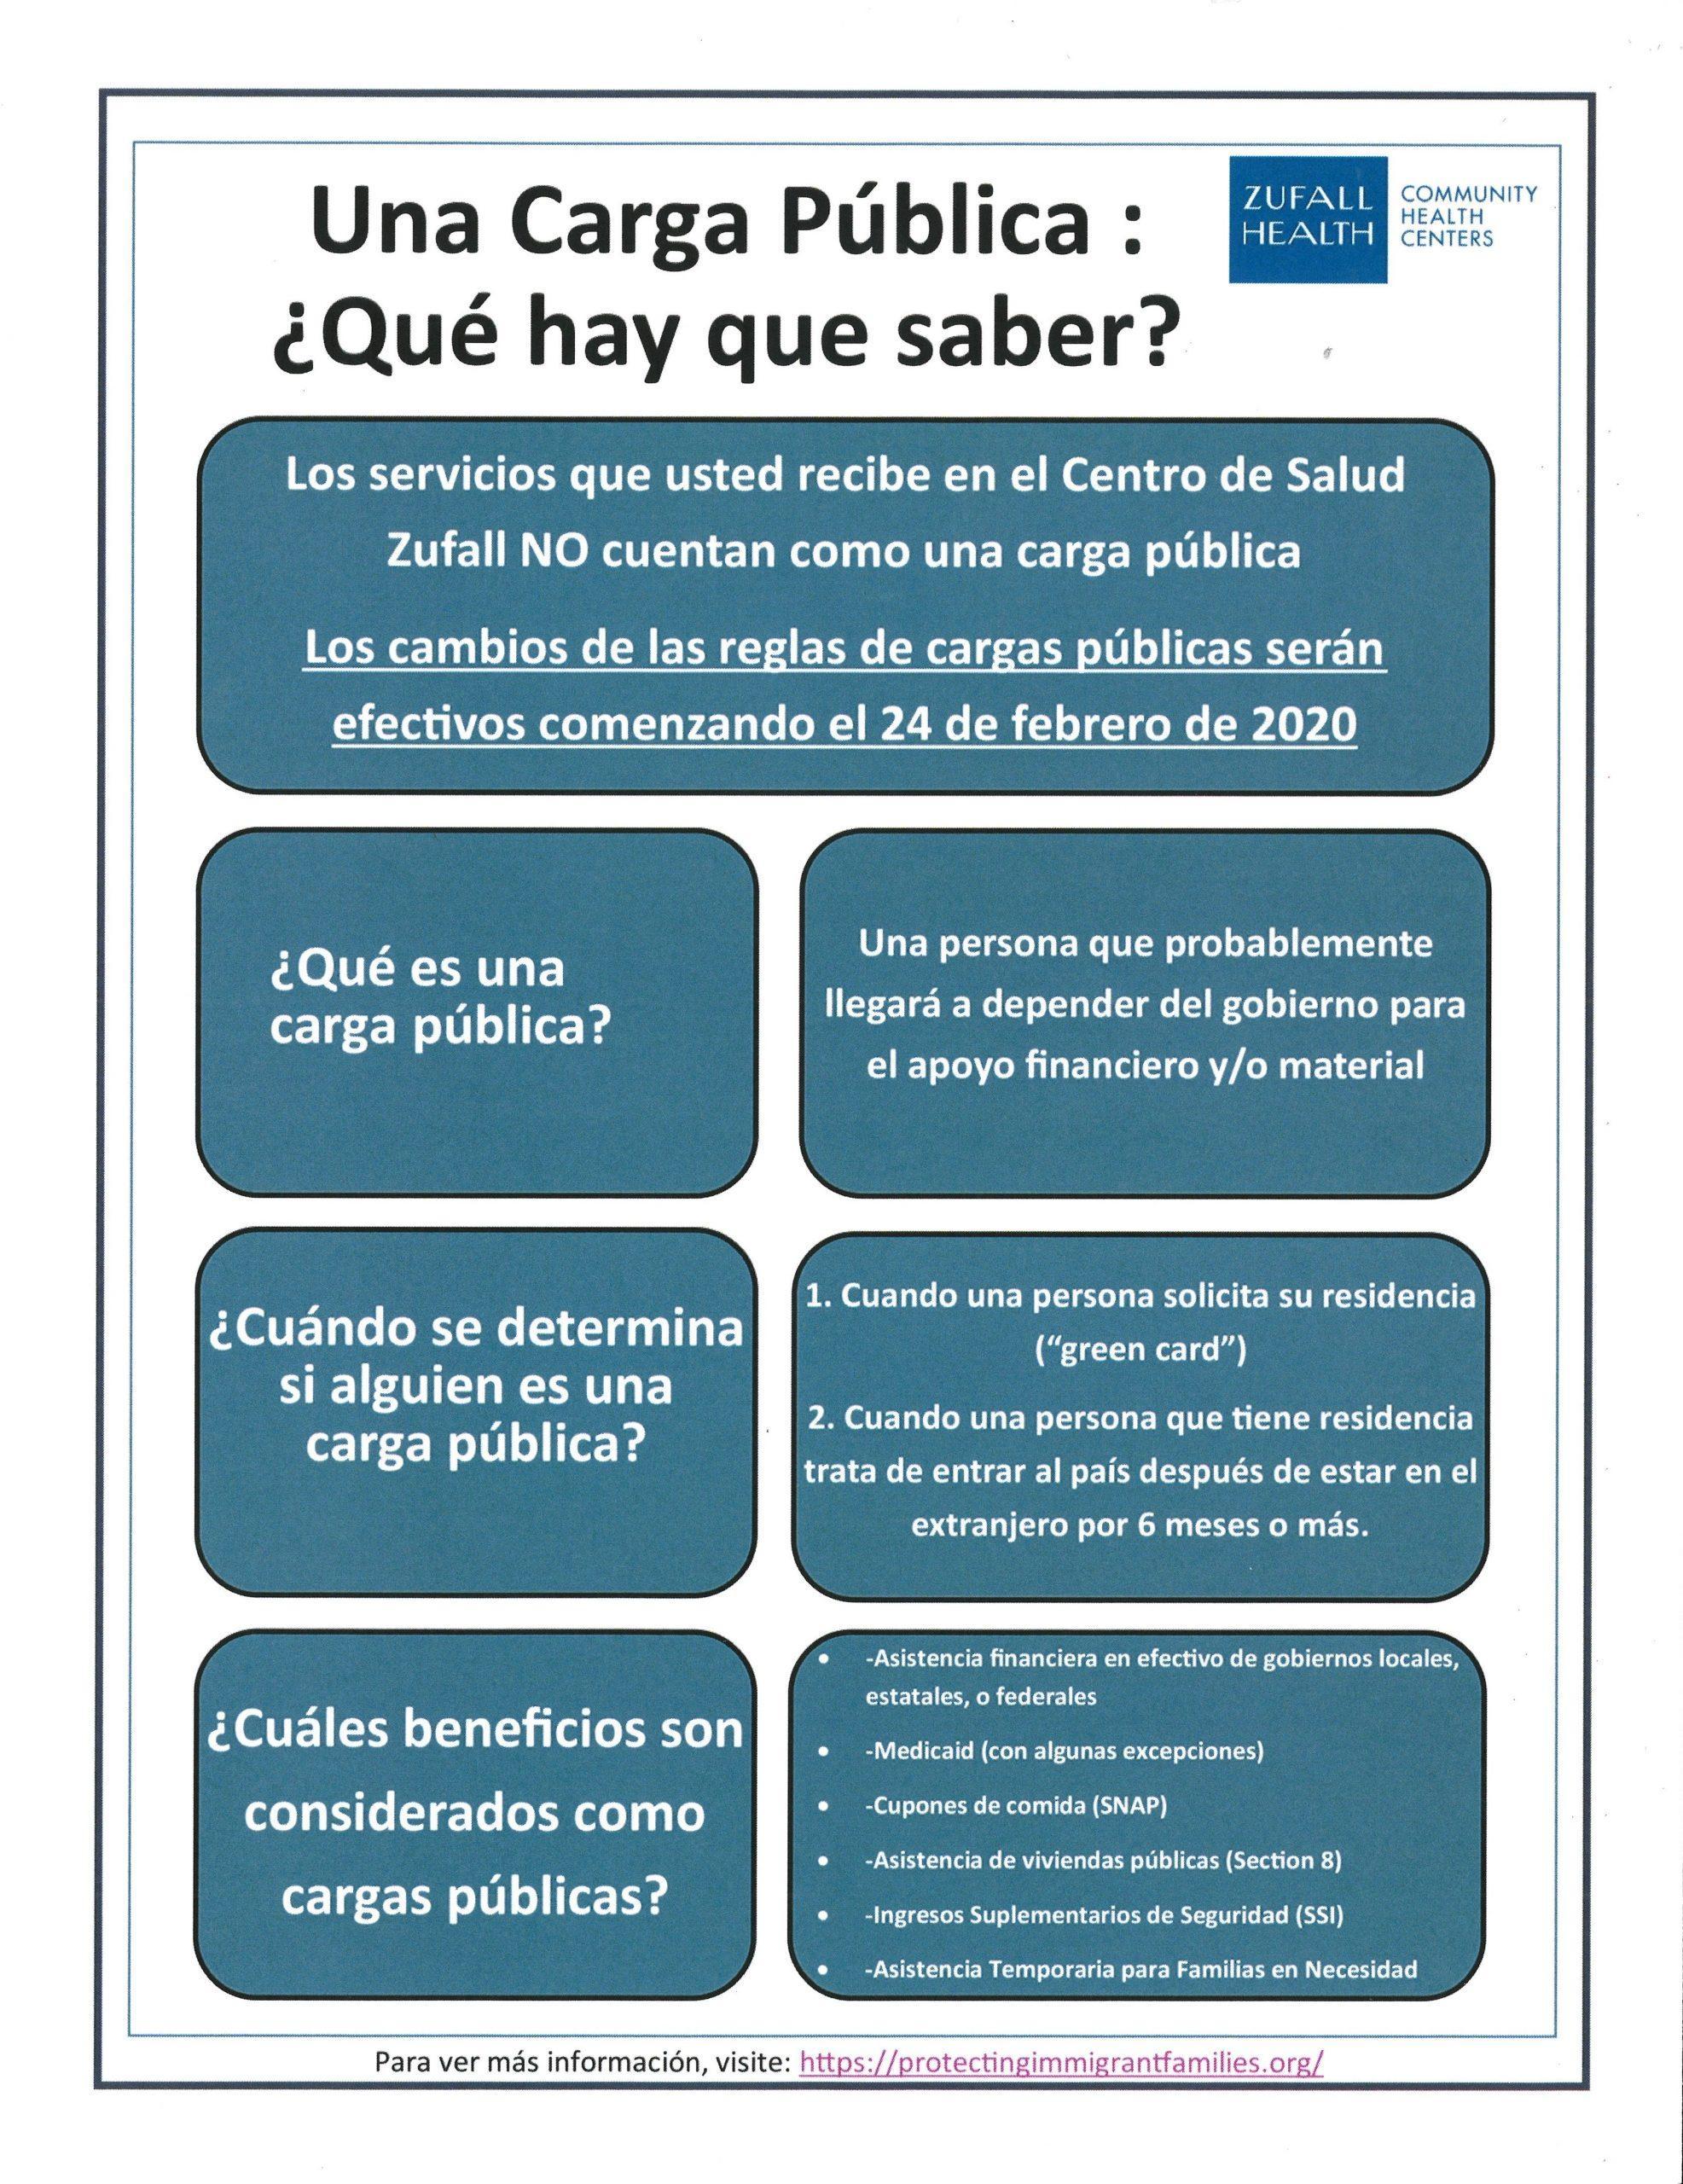 Public Charge: Things to Know flyer in Spanish